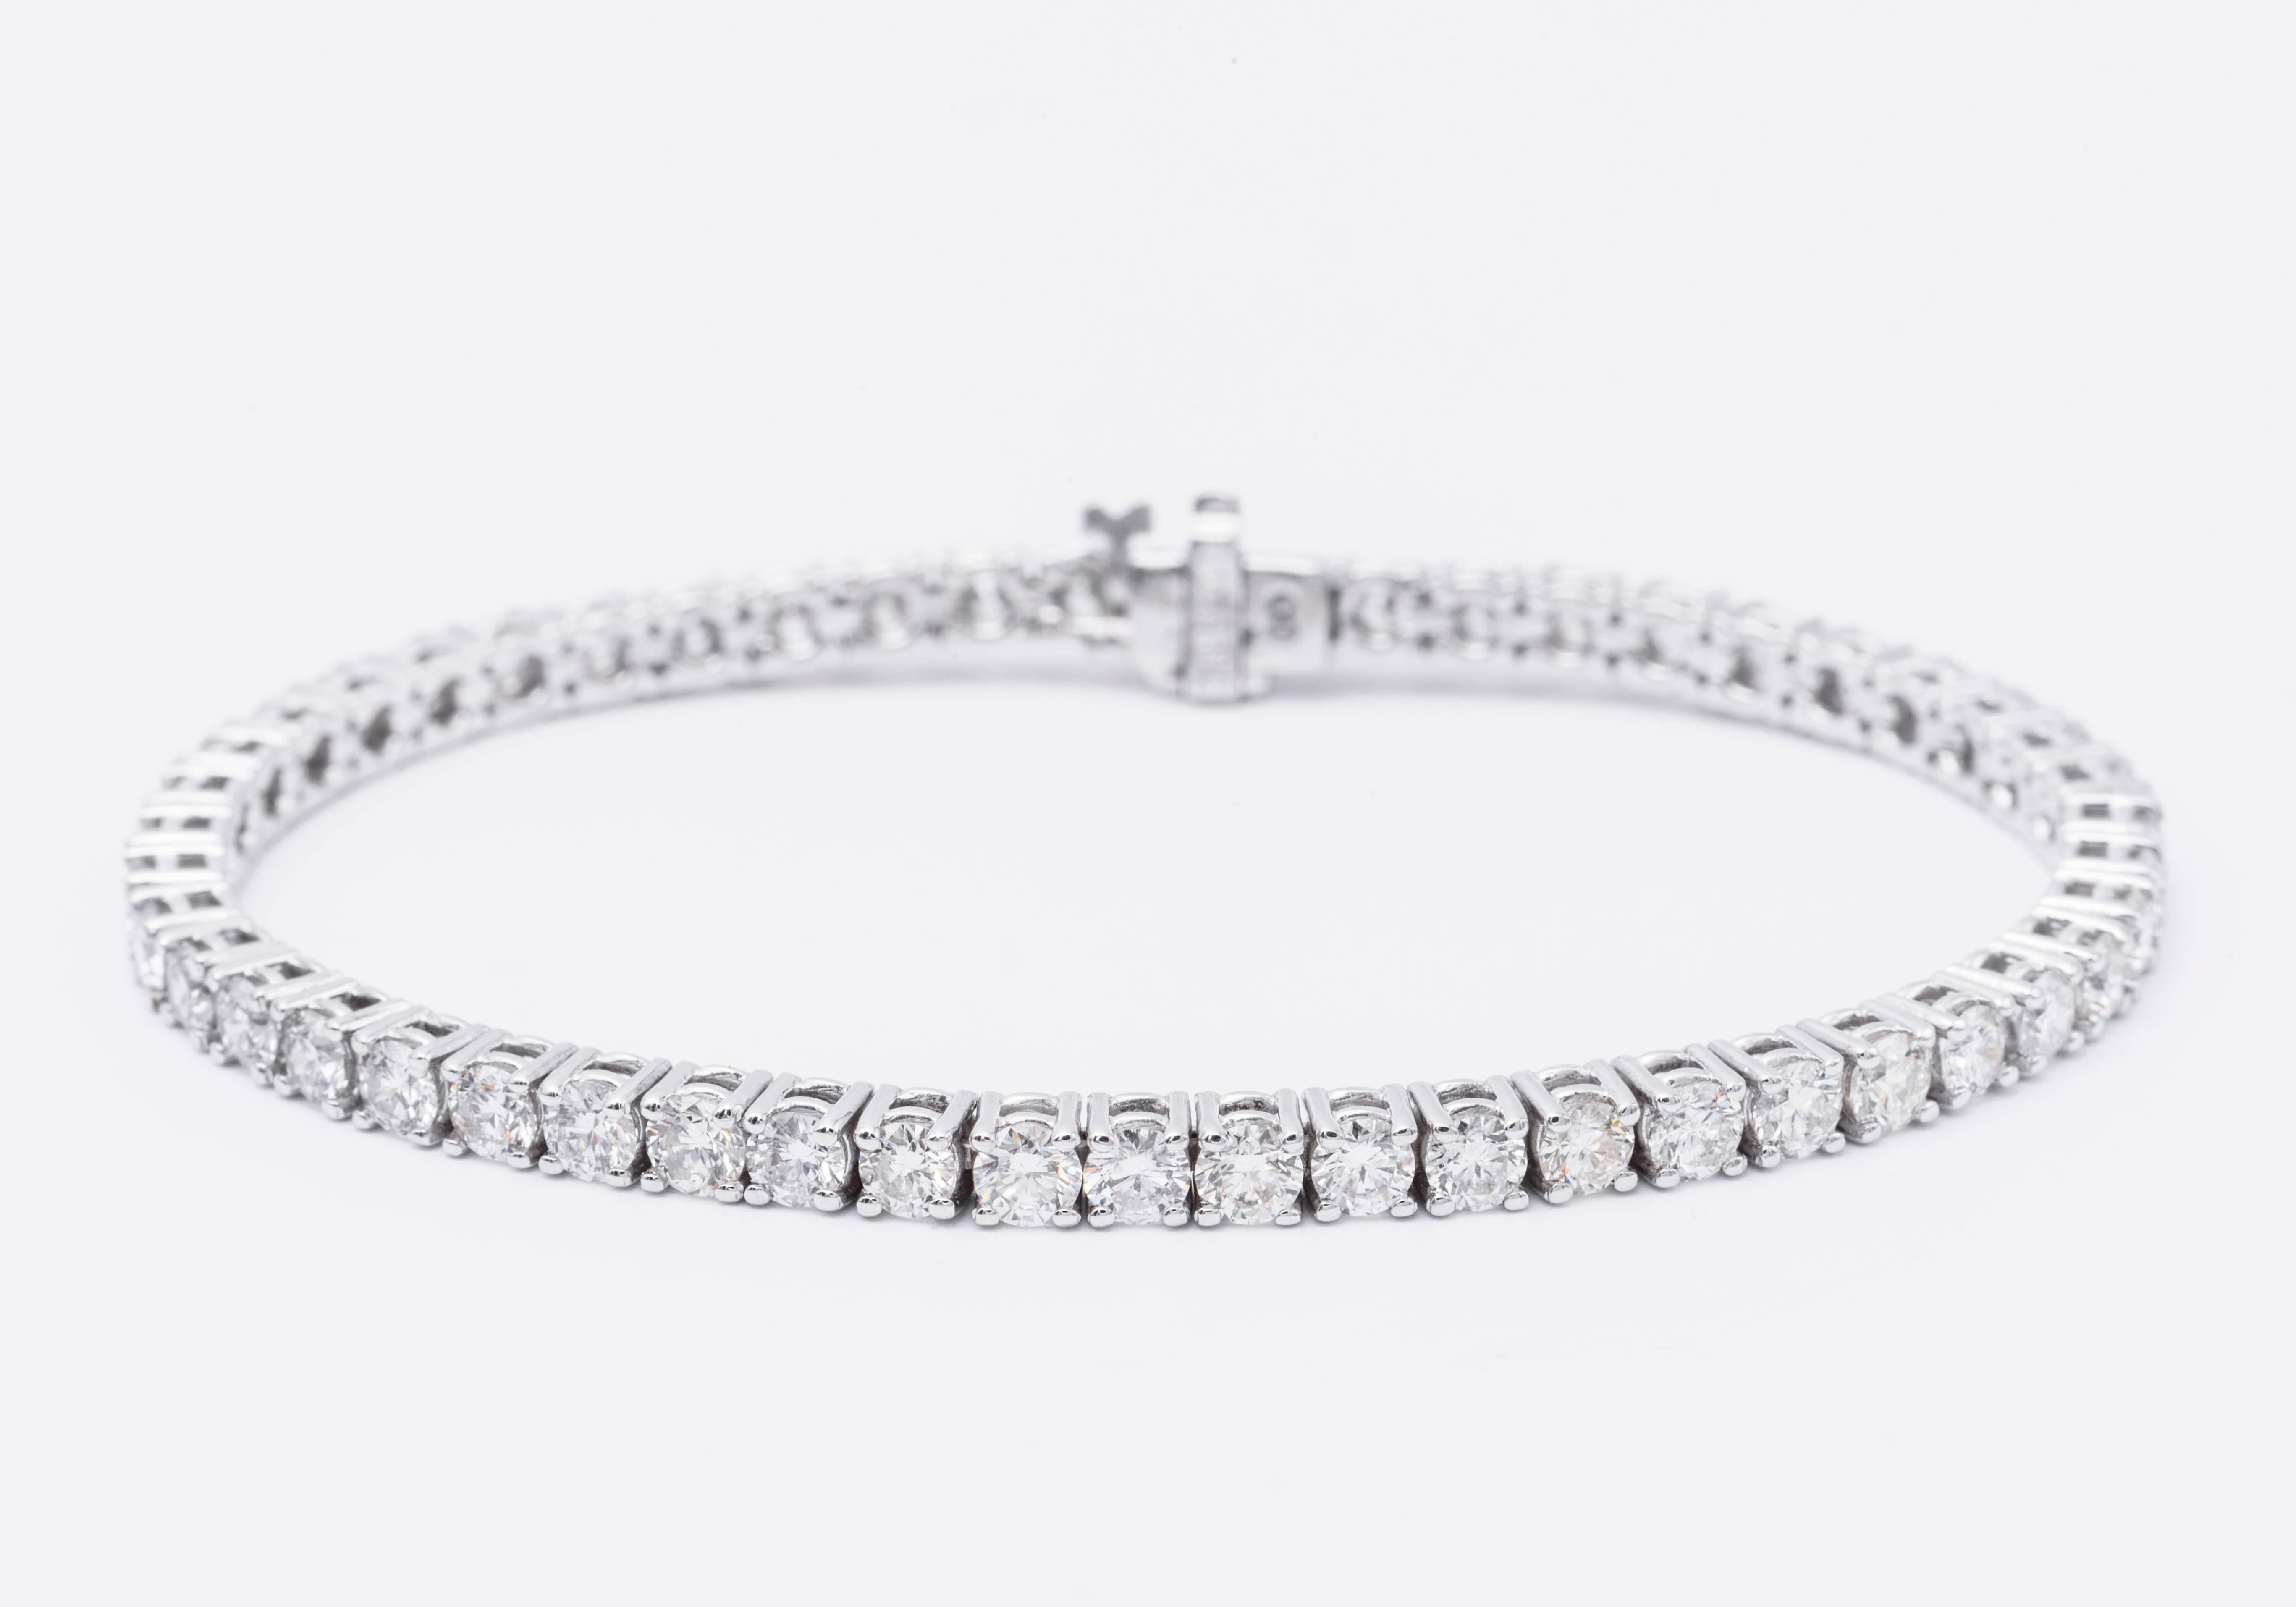 14K white gold tennis bracelet
72 diamonds. all hand picked and matched by our very experienced gemologist.
All diamonds are G-H color and SI quality. 100 percent eye clean to the naked eye. Very bright and full of life.
Our setter is one of the